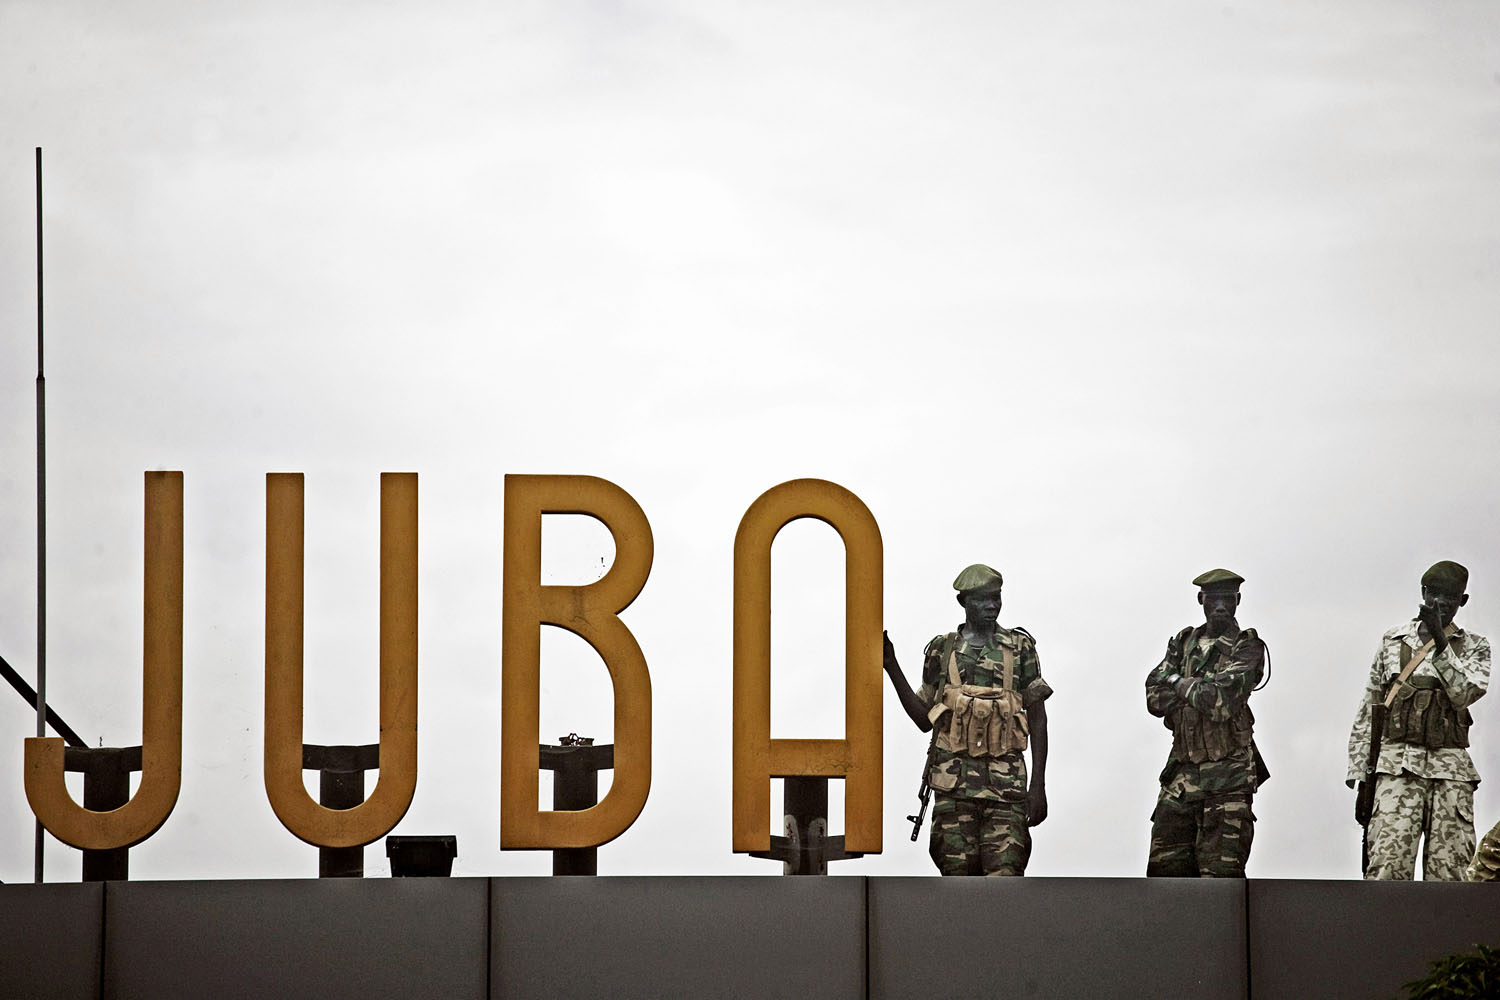 Southern soldiers stand guard on the roof of the airport in Juba, southern Sudan's defacto capital city.